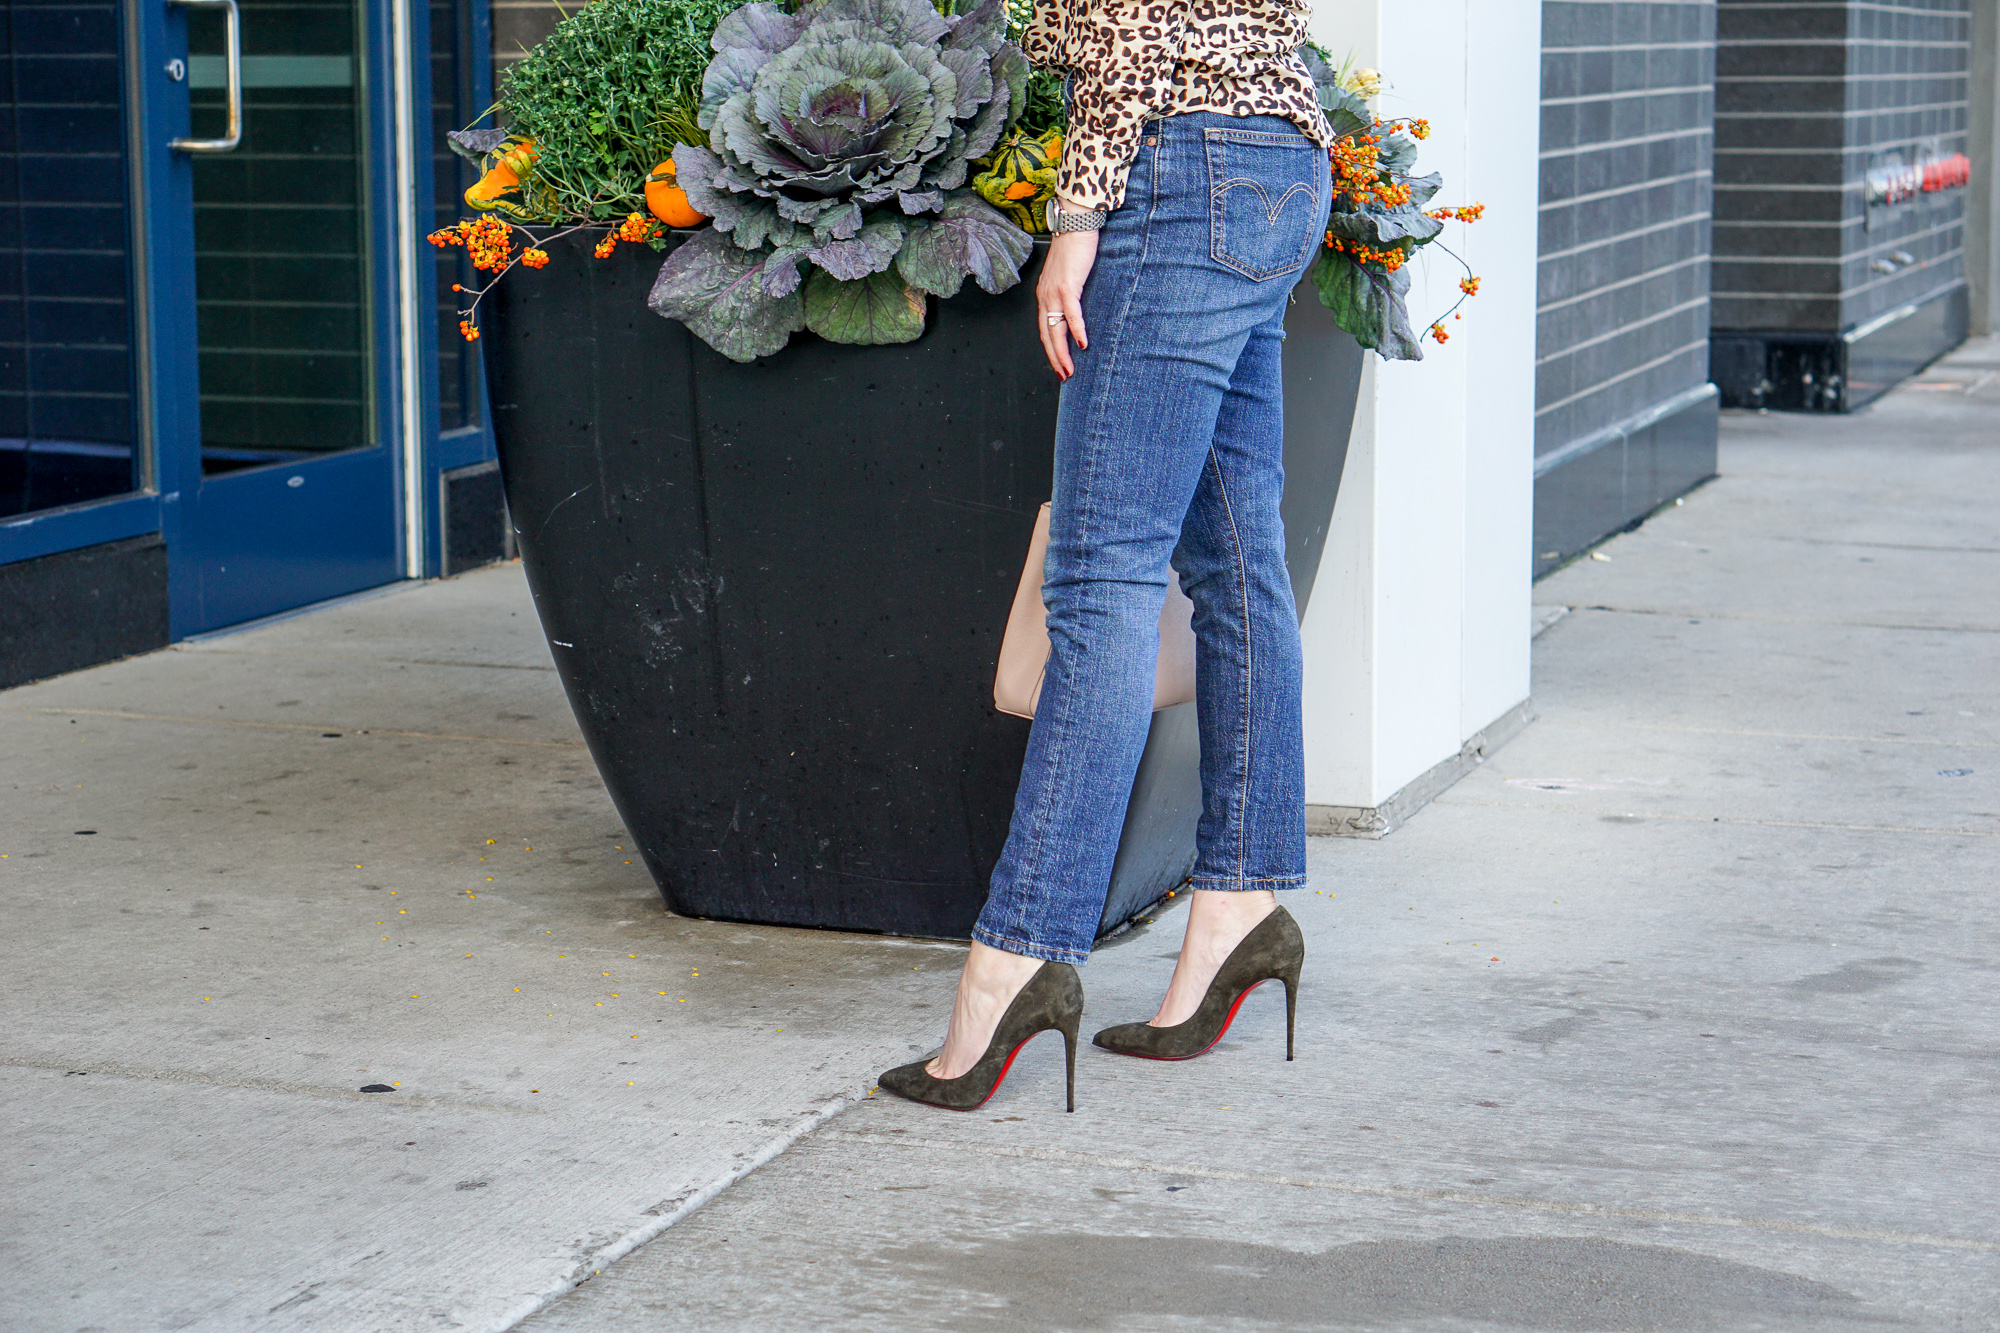 How to Wear High Waisted Jeans - The New Mom Jean - Walking in Memphis in  High Heels